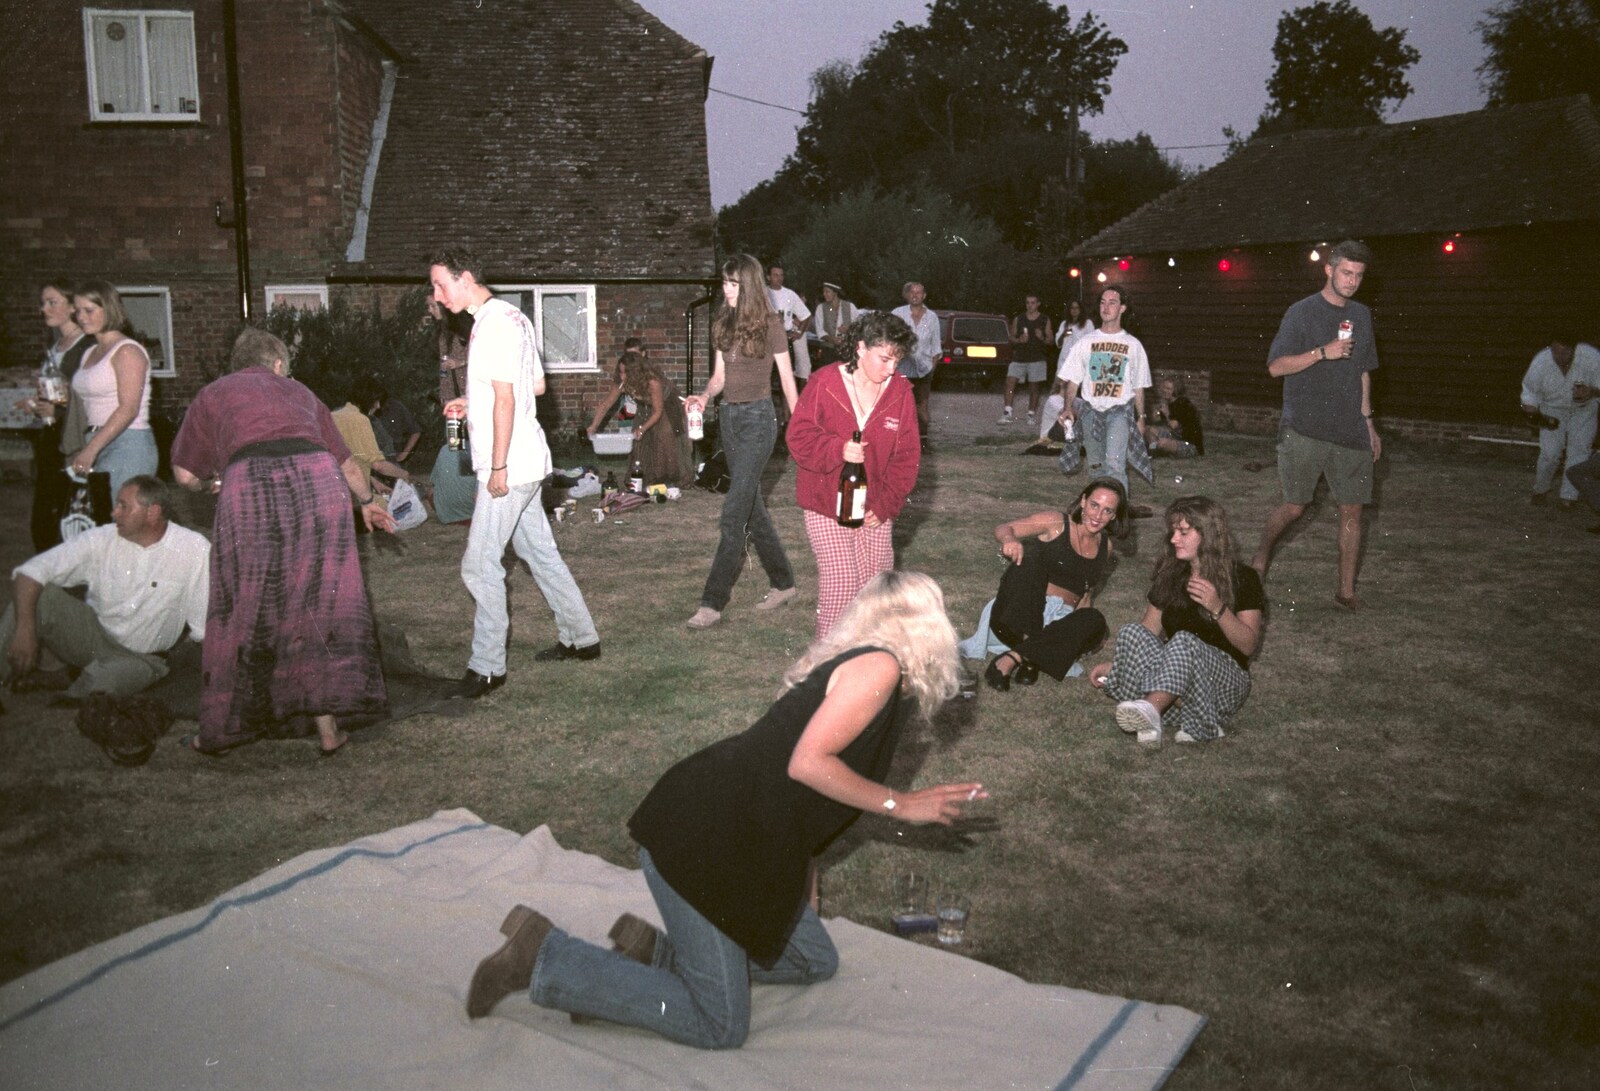 The crowd assembles from Sean's ElstedBury Festival, Elsted, West Sussex - 12th July 1996